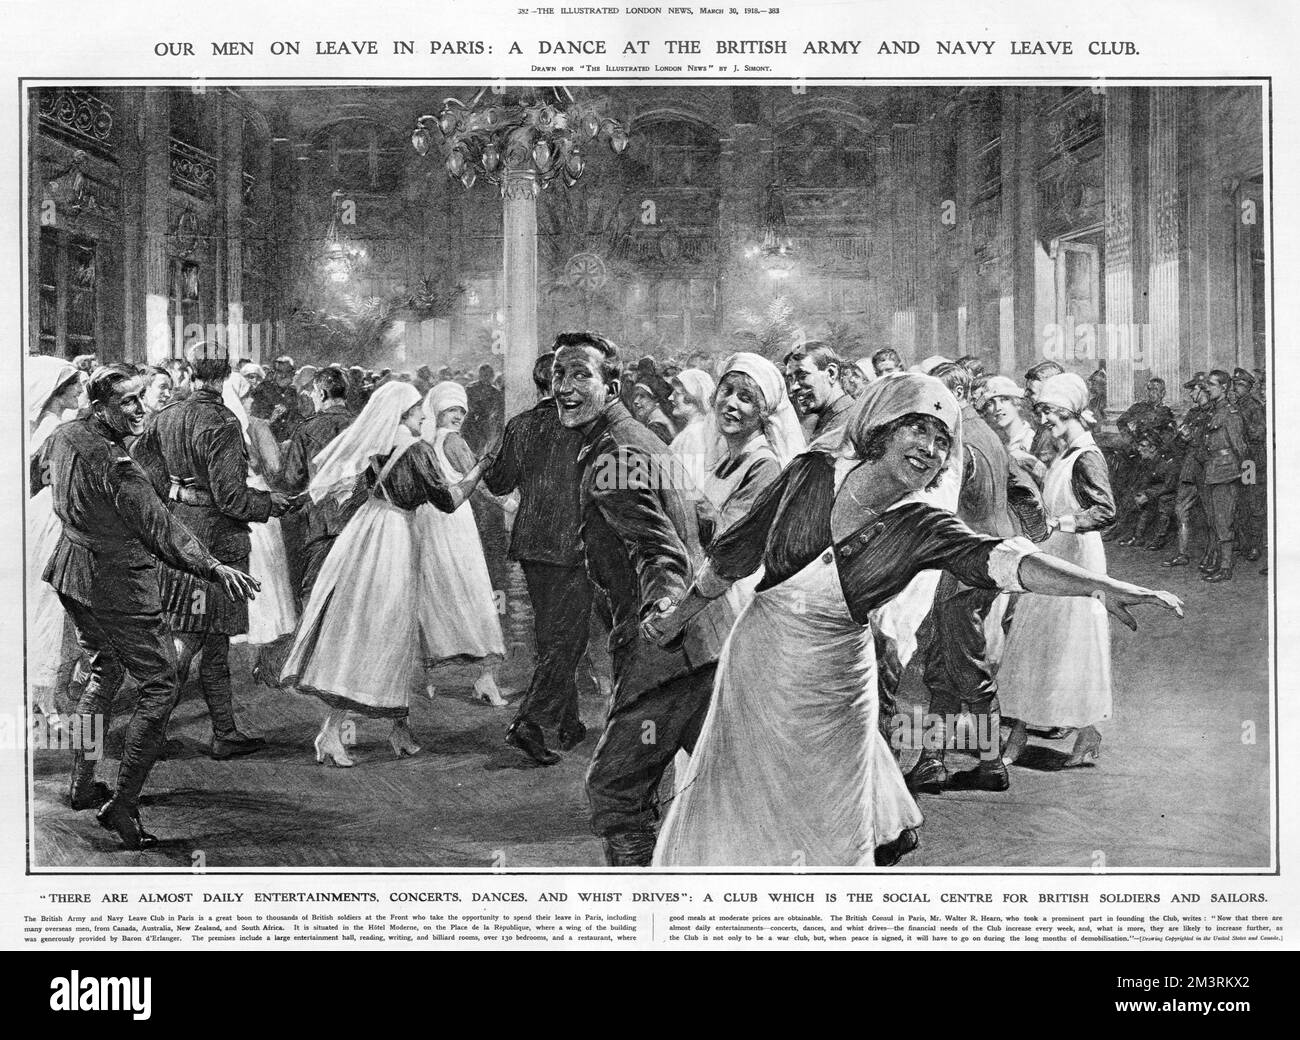 Our men on leave in Paris: a dance at the British Army and Navy Leave Club, 1918. The British Army and Navy Leave Club in Paris is a great boon to thousands of British soldiers at the Front who spend leave in Paris, including many overseas men from Canada, Australia, New Zealand and South Africa. It is situated in the Hotel Moderne on the Place de la Republique. There are almost daily entertainments such as concerts, dances and whist drives, making it the social centre for British soldiers and sailors.     Date: 1918 Stock Photo